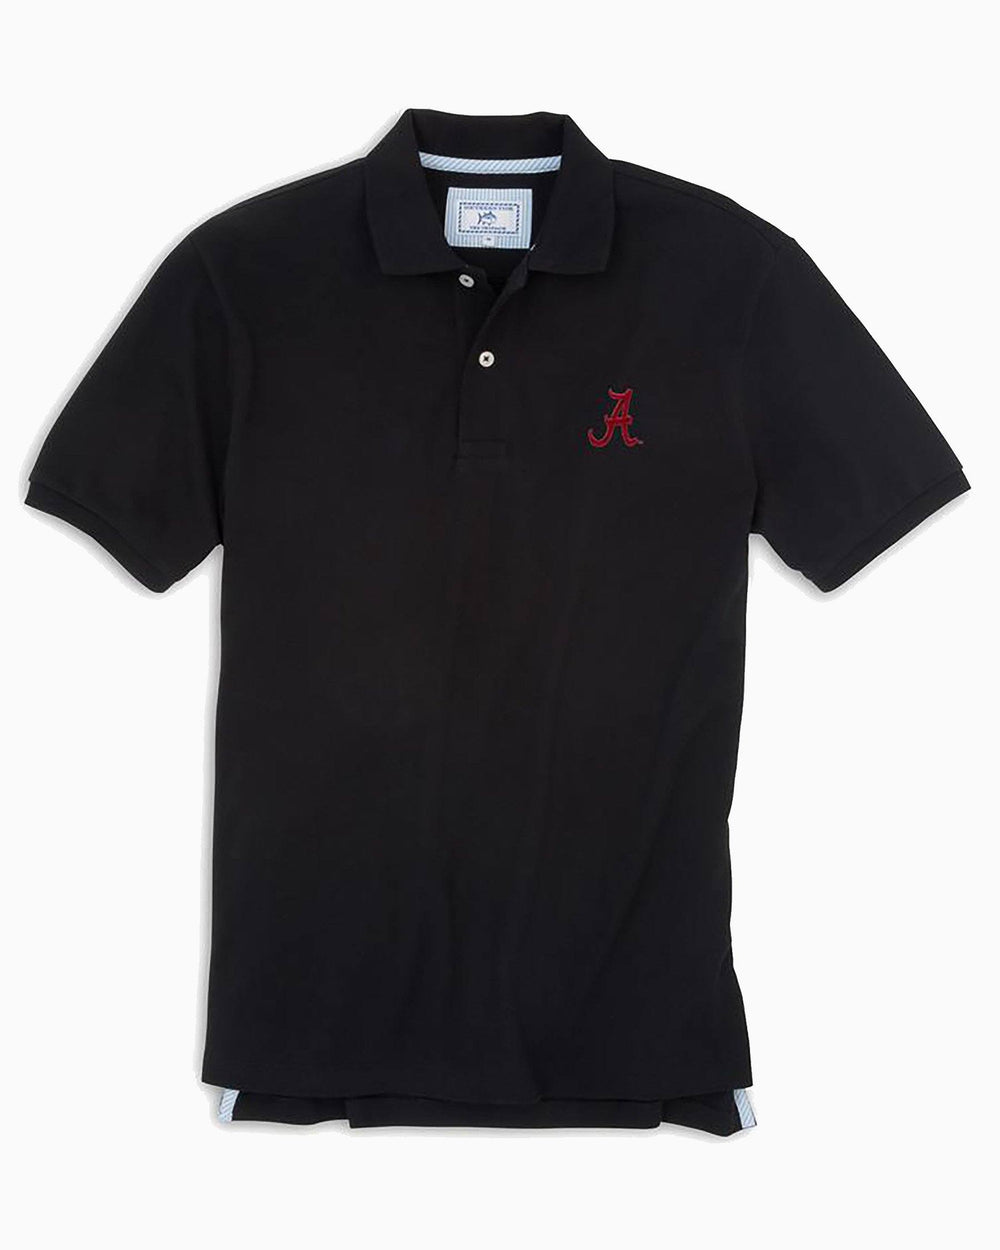 The front view of the Men's Black Alabama Crimson Tide Pique Polo Shirt by Southern Tide - Black